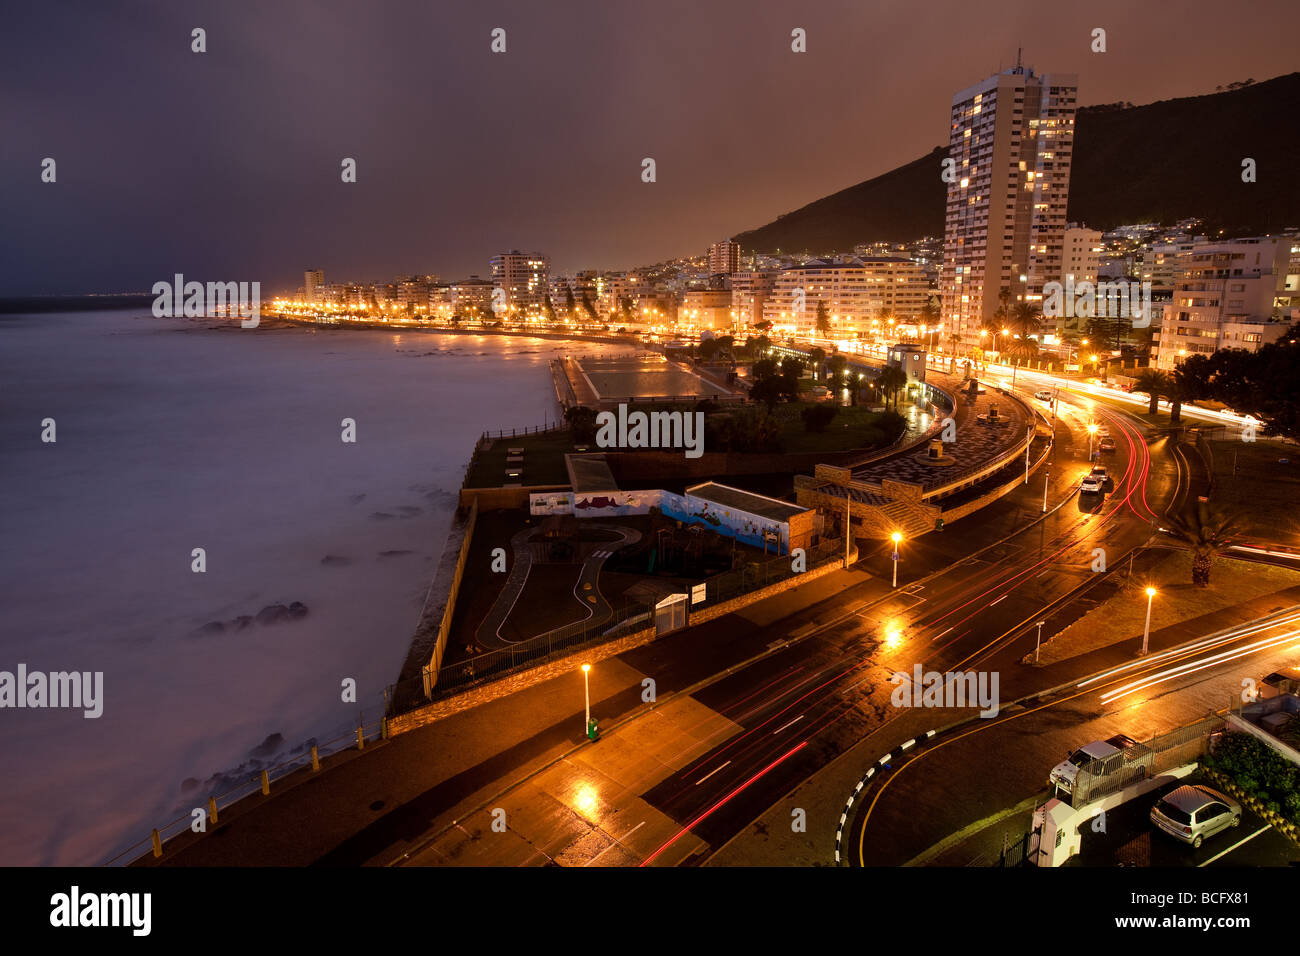 Sea Point, Green Point, Cape Town, South Africa at night Stock Photo